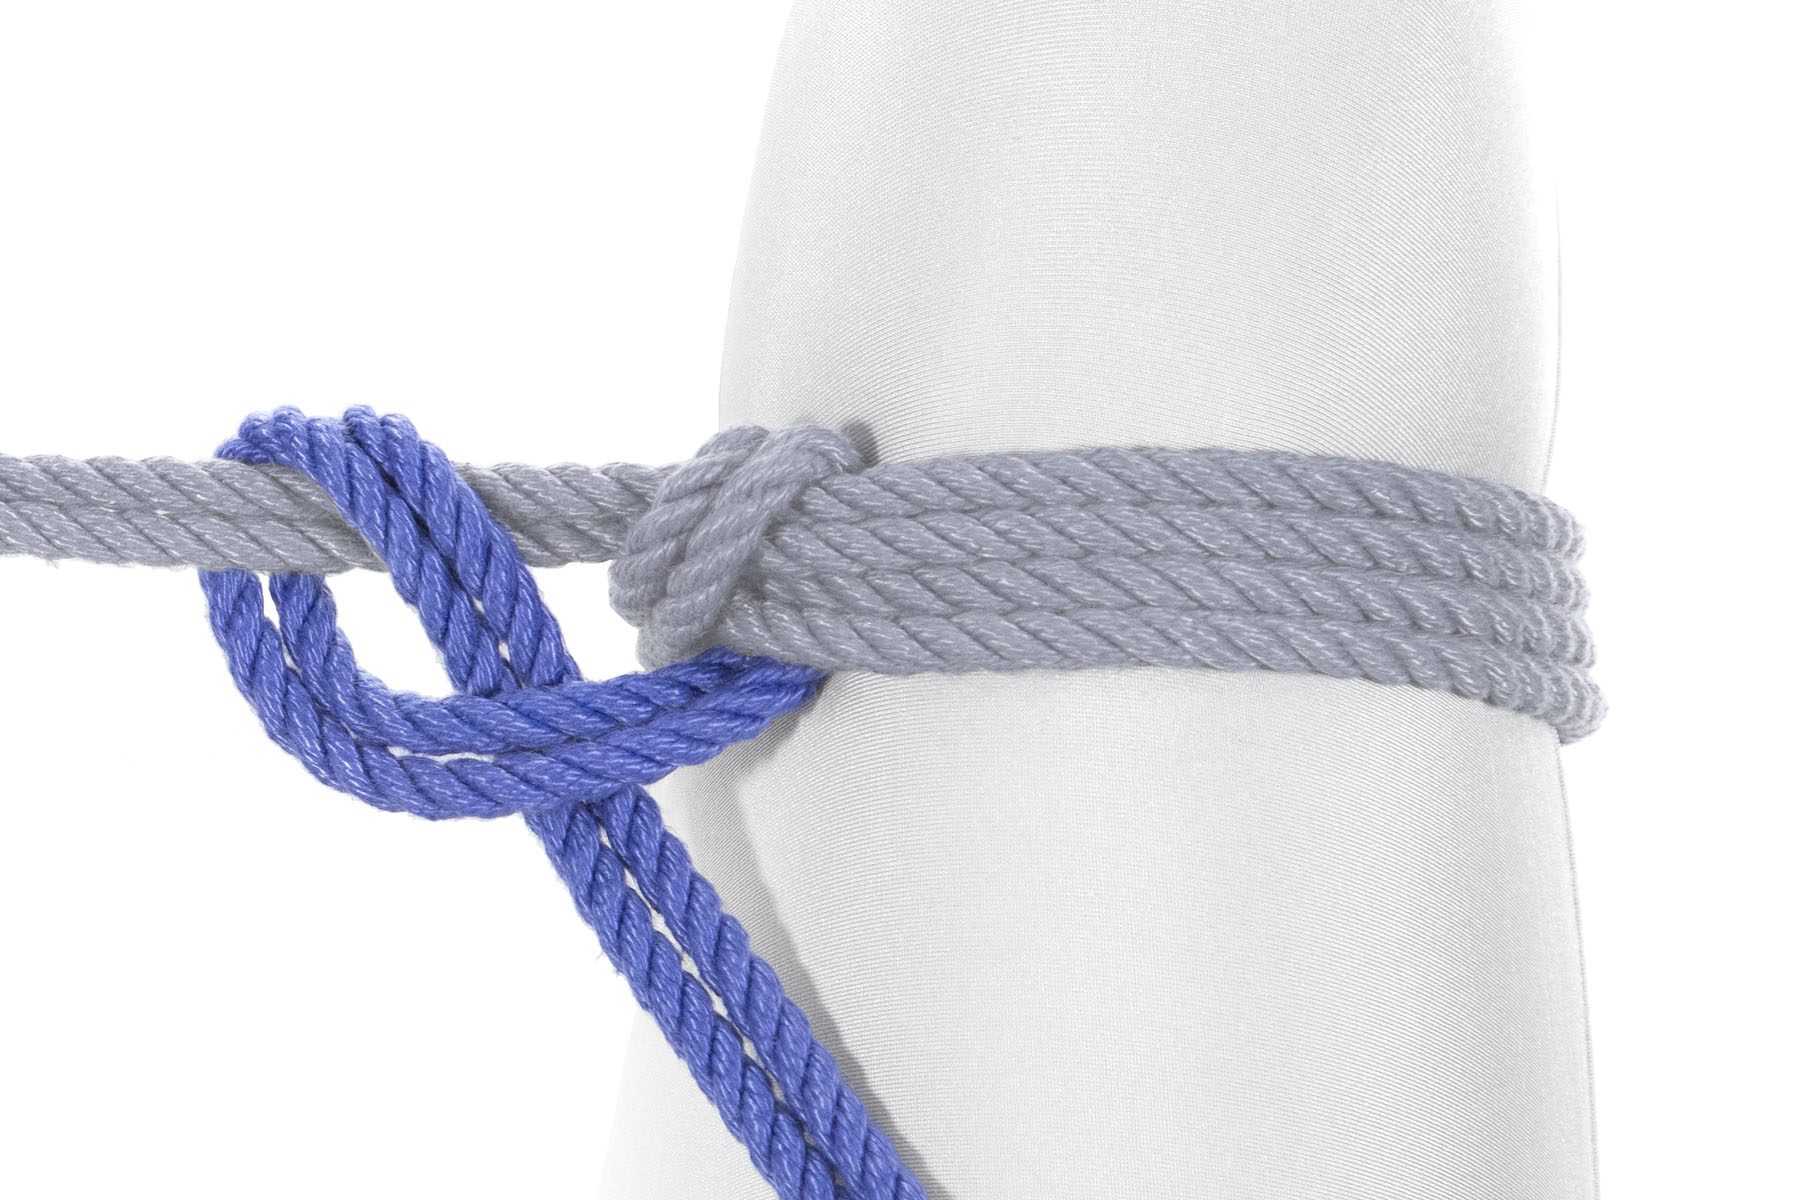 The running end is tied in a half hitch around the original line that entered from the left of the image and went around the leg. It crosses under that line, doubles back over it, then crosses under itself to make a half hitch.